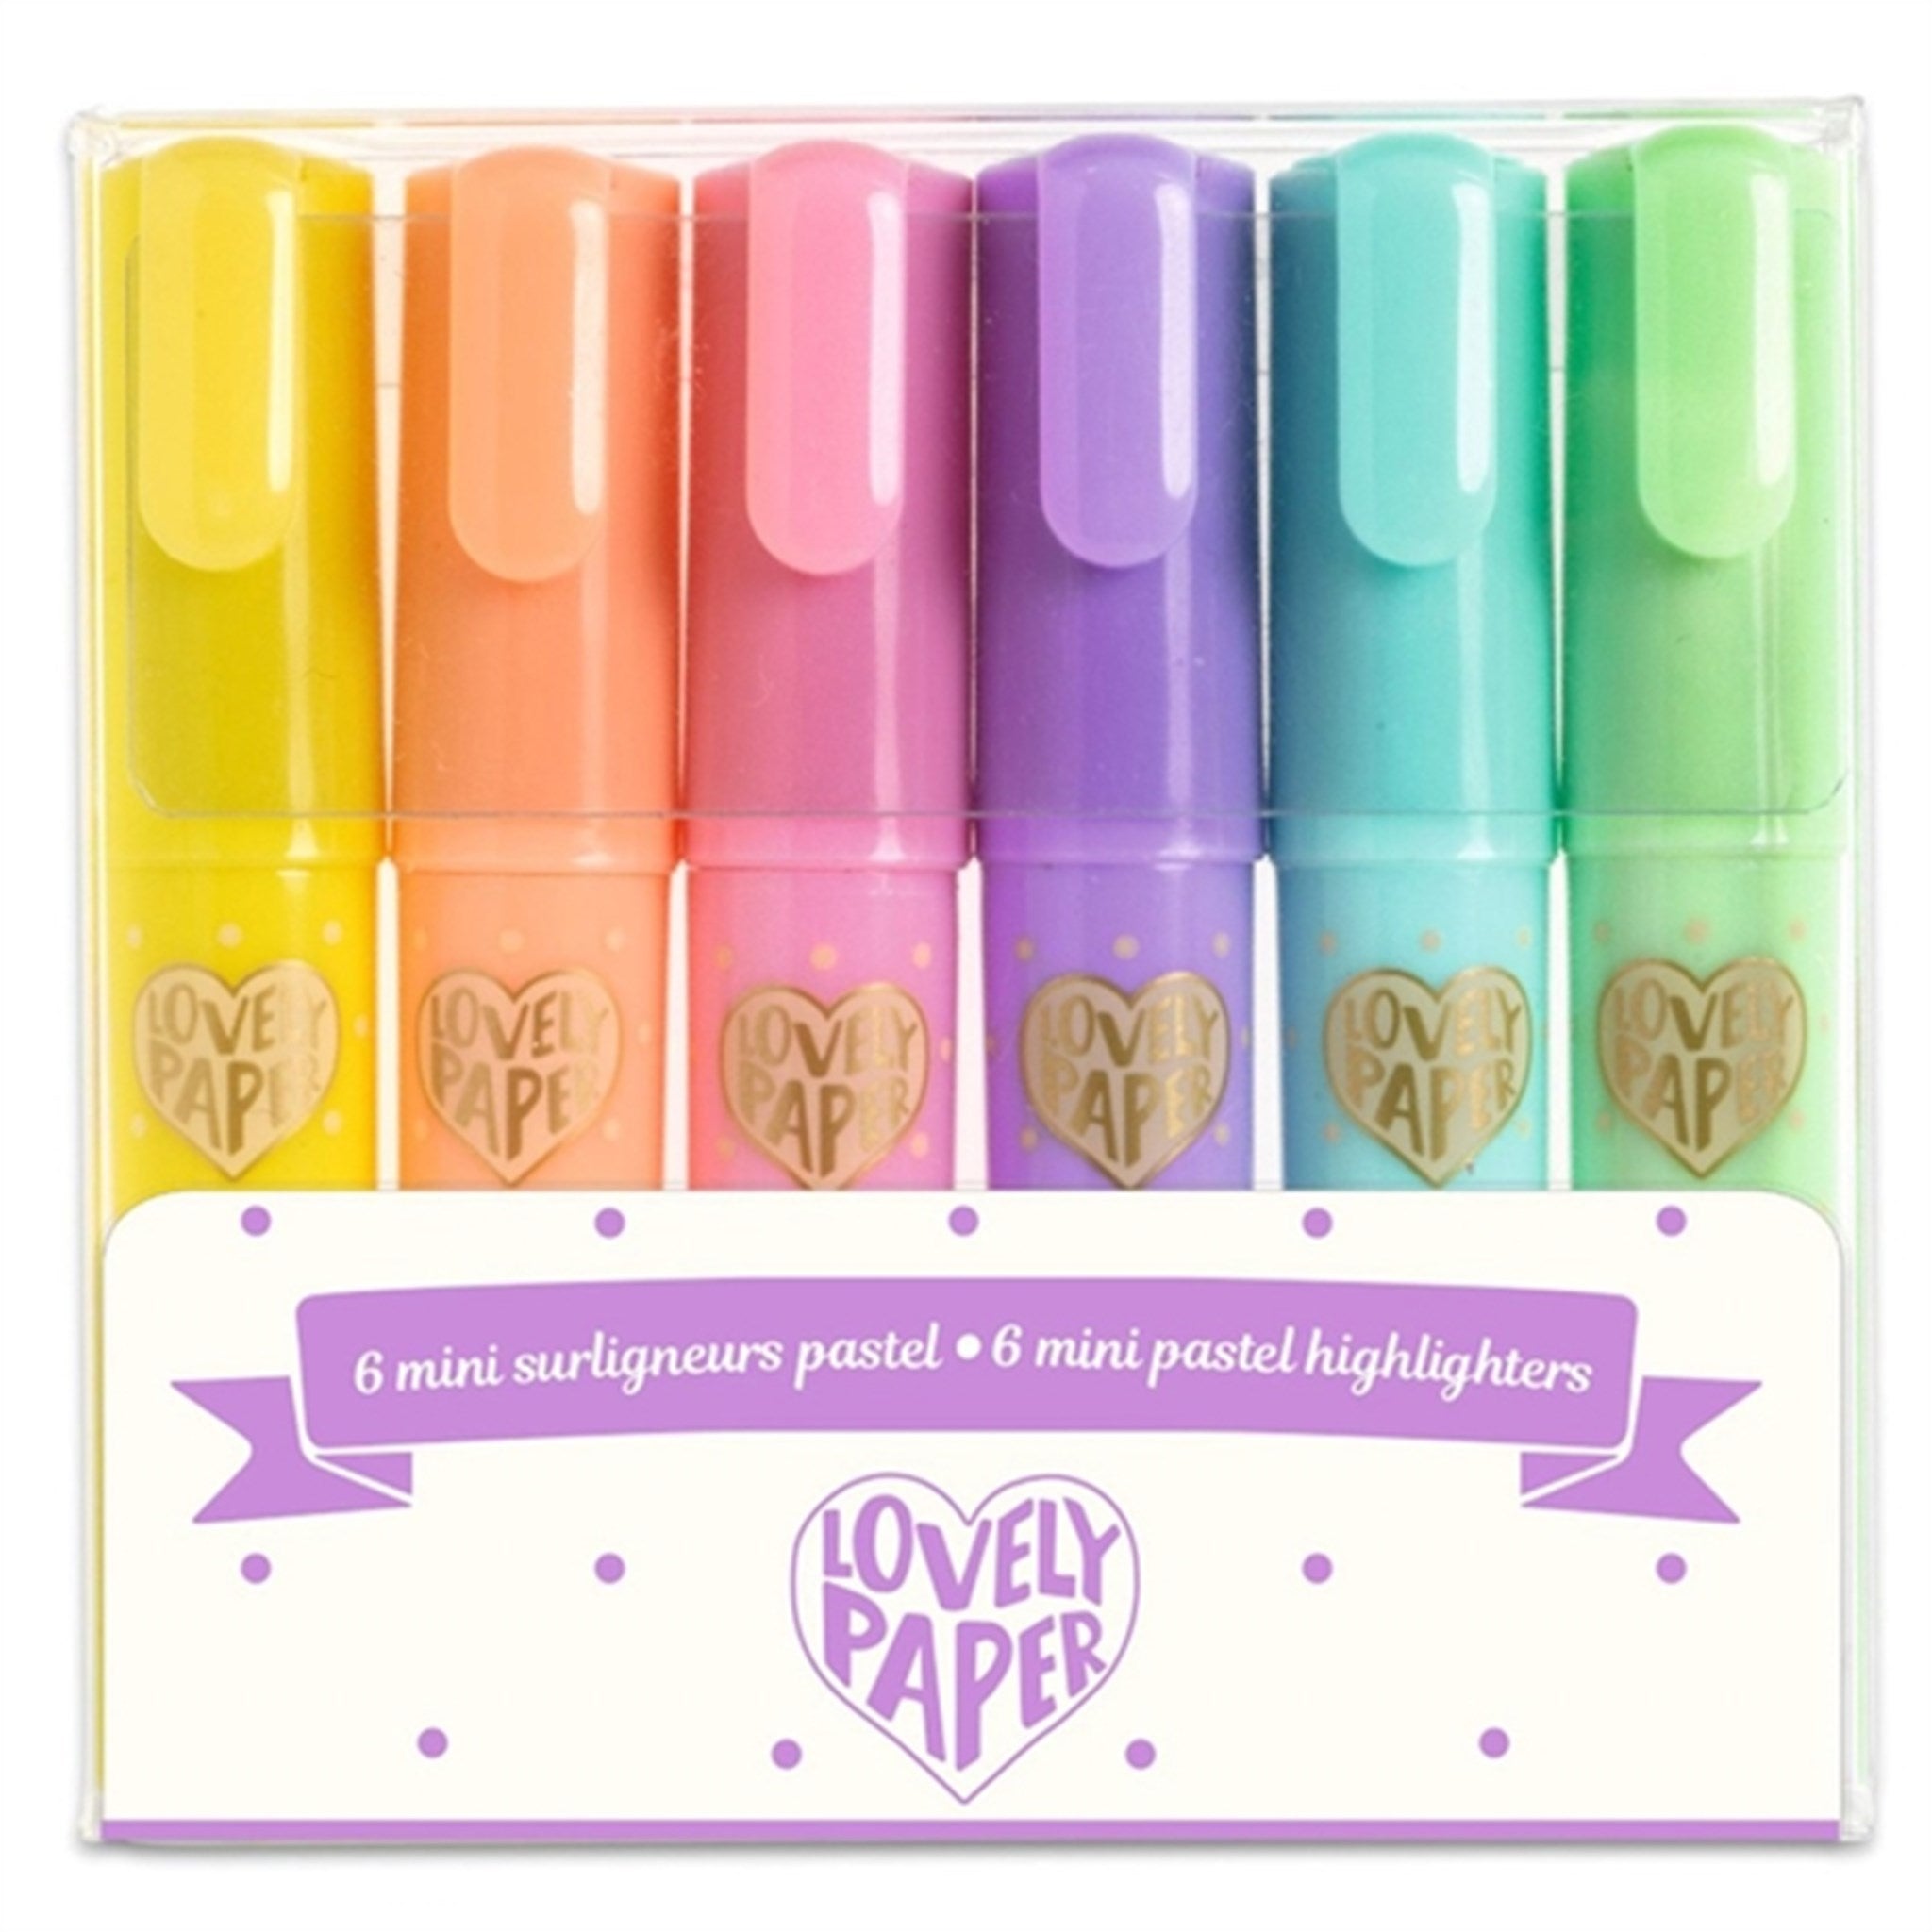 Djeco Lovely Paper 6 Mini Pastel Highlighters